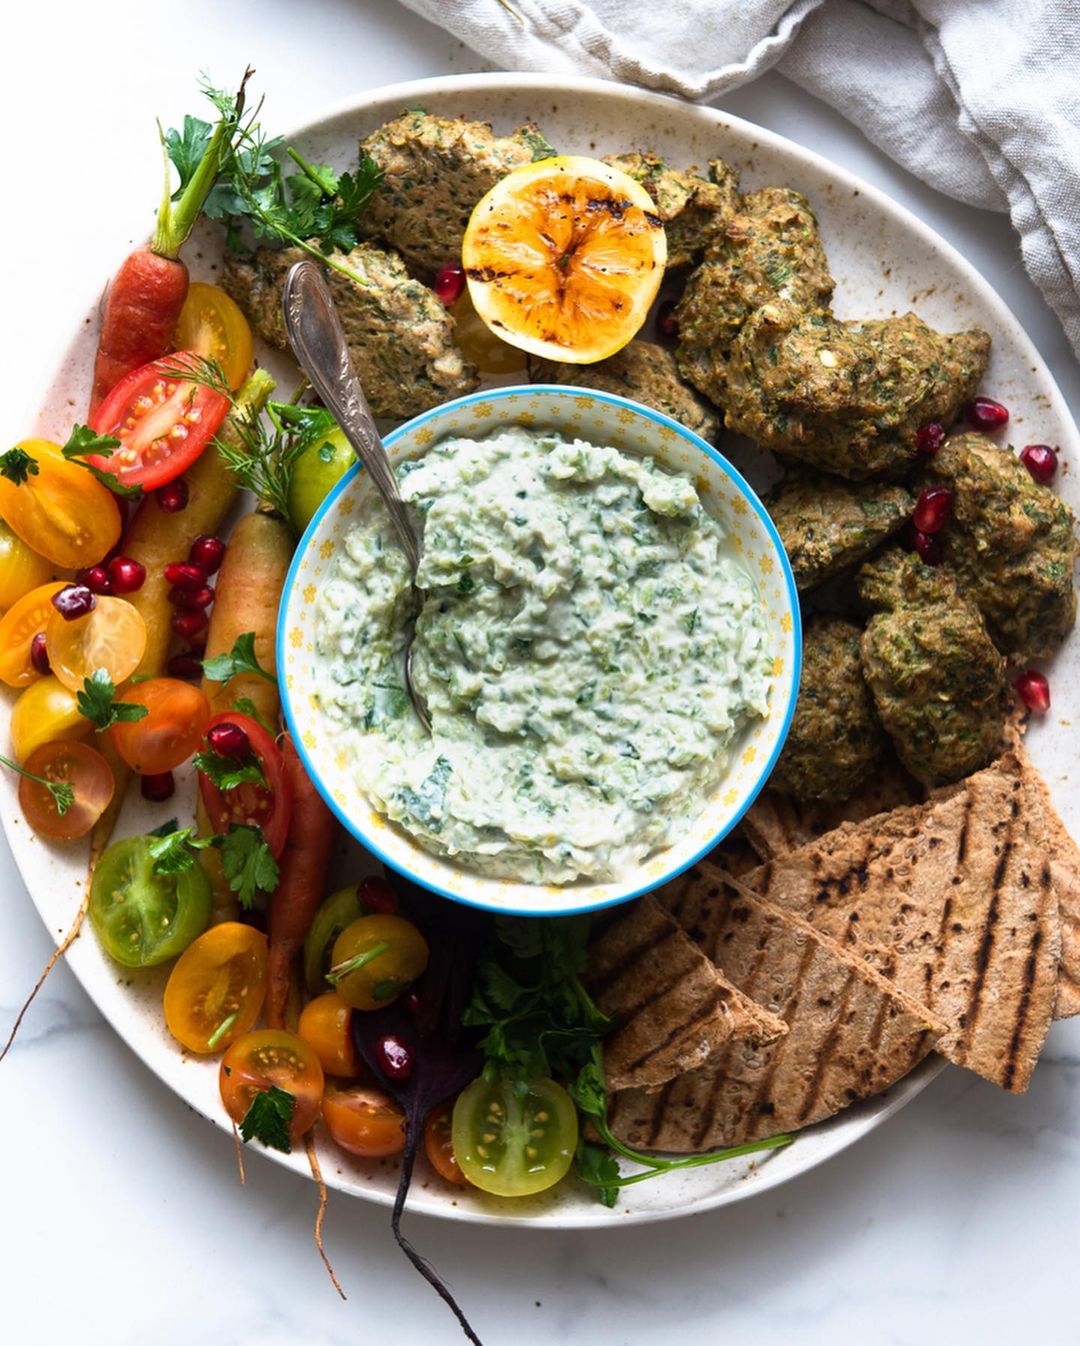 Snack Plate Made with Vegan Tzatziki, Lentil Kebabs and Chopped Salad